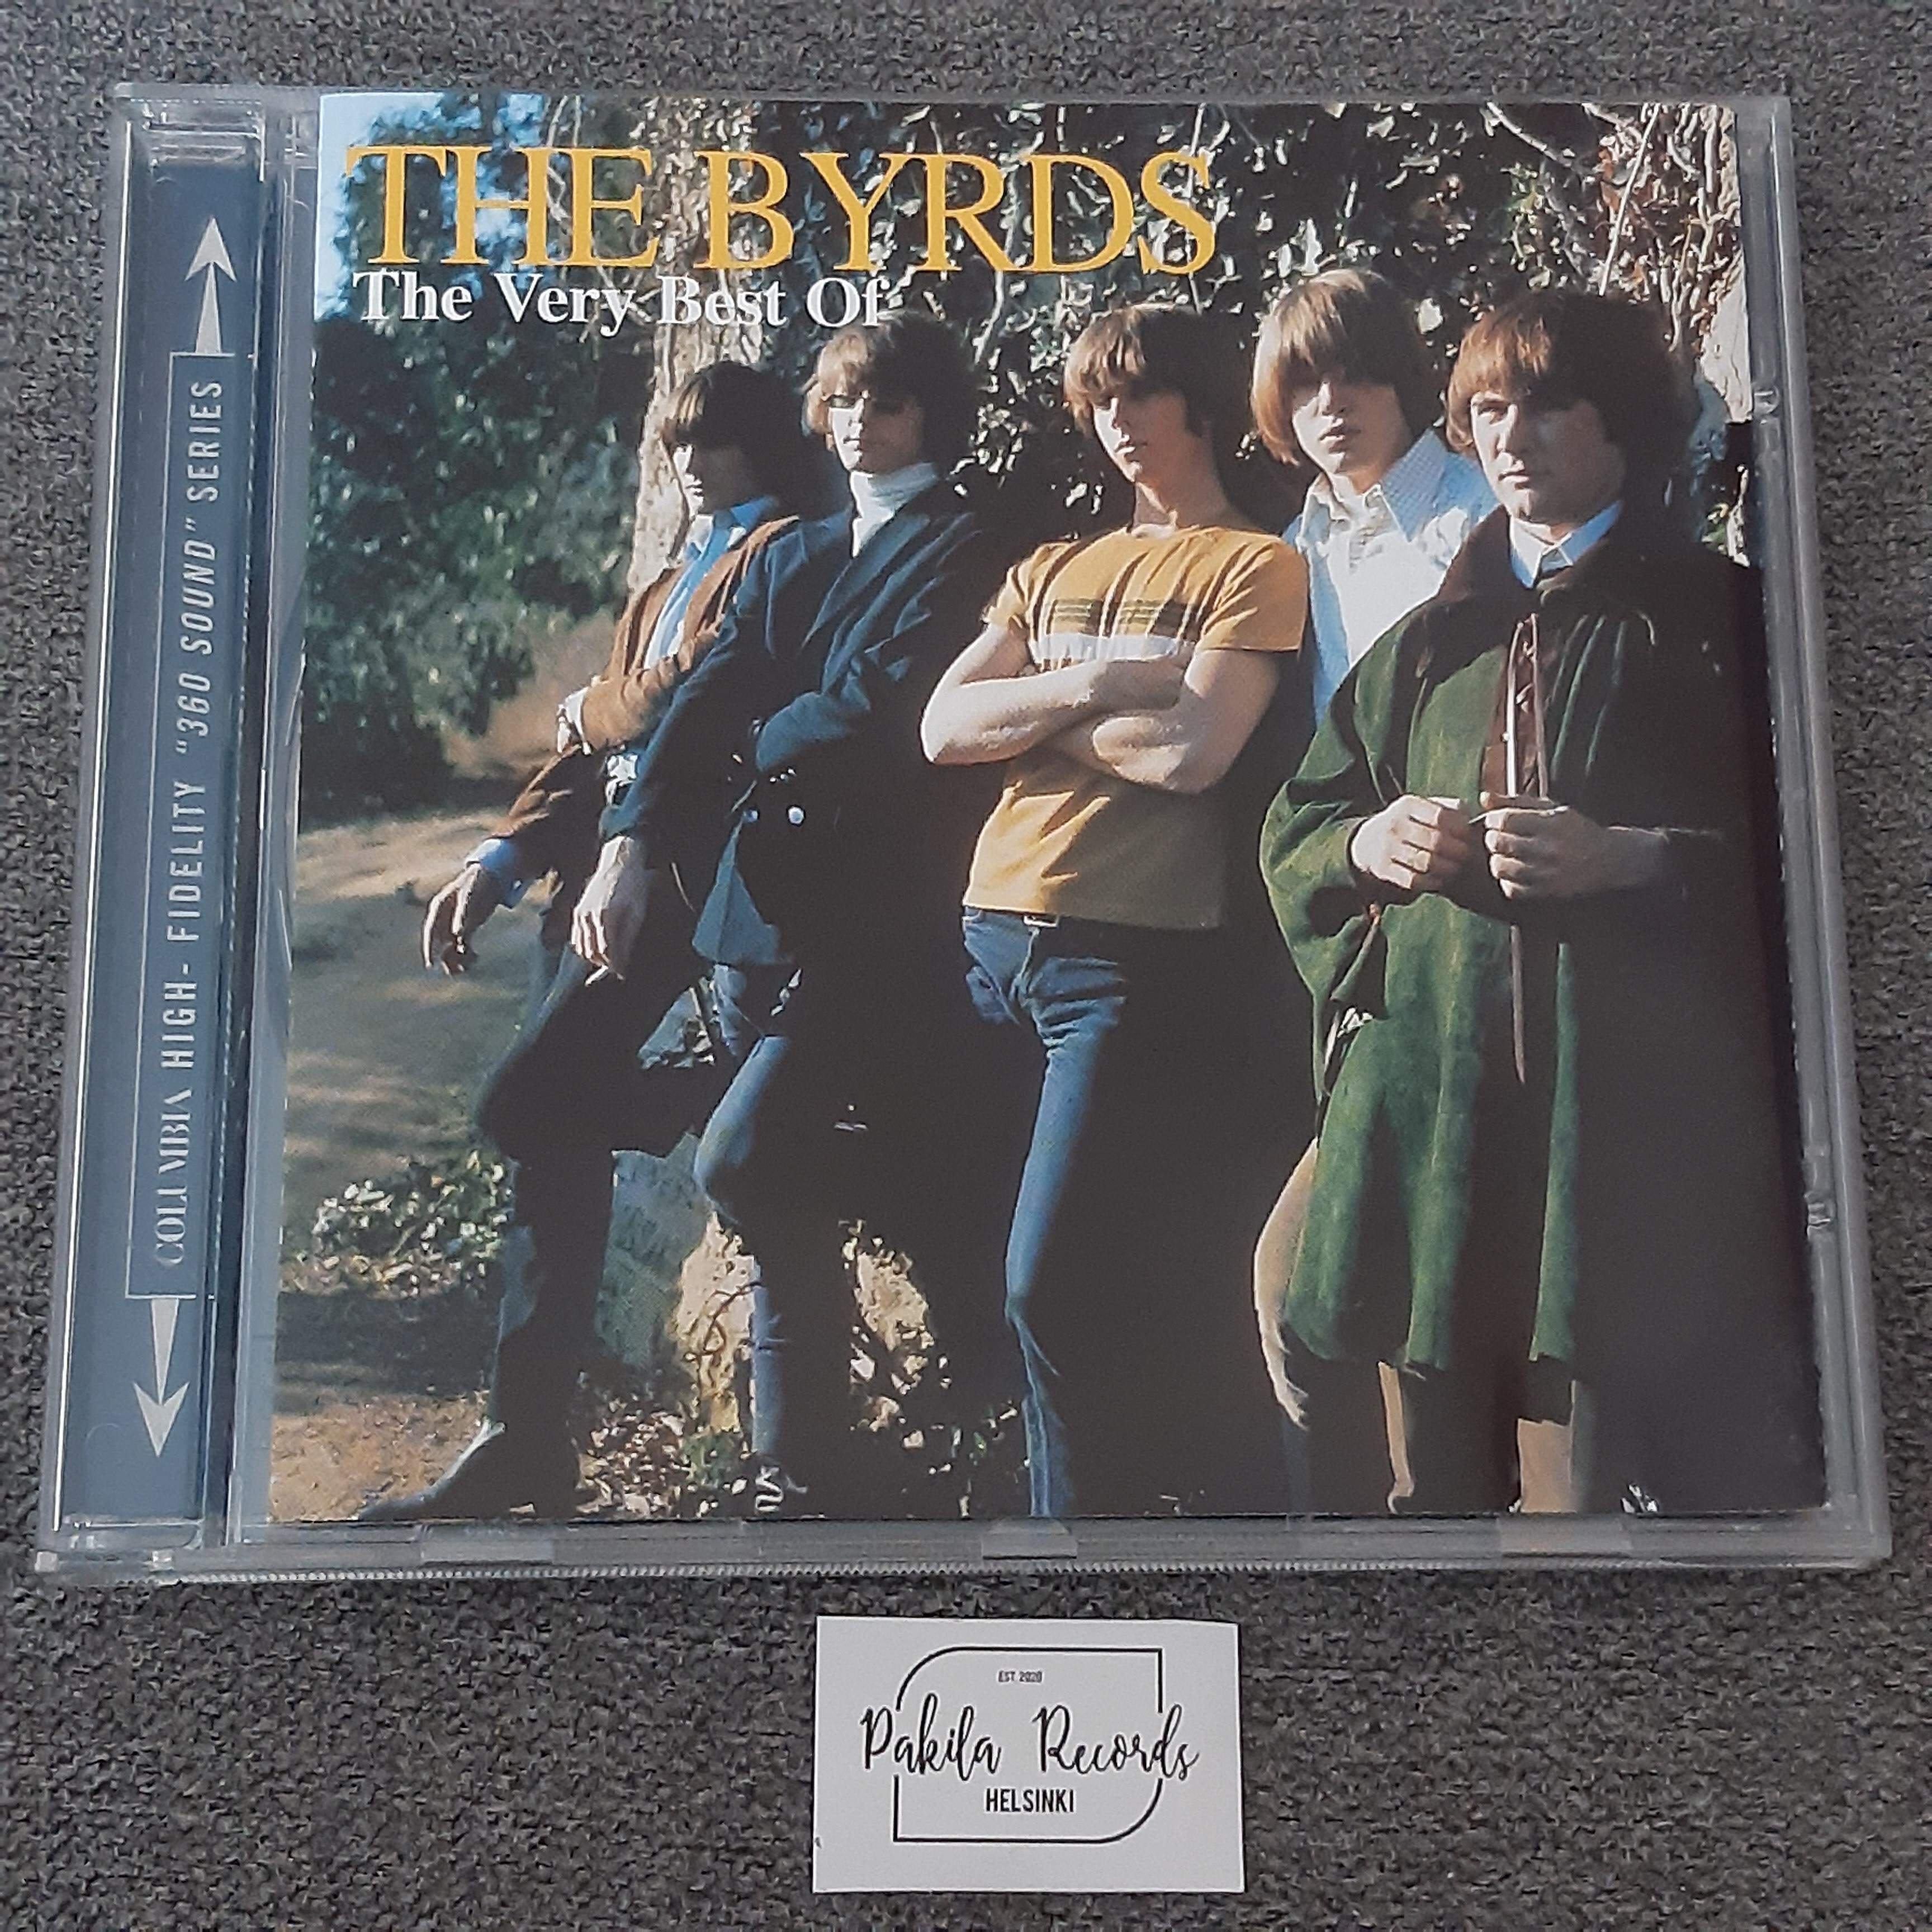 The Byrds - The Very Best Of - CD (käytetty)